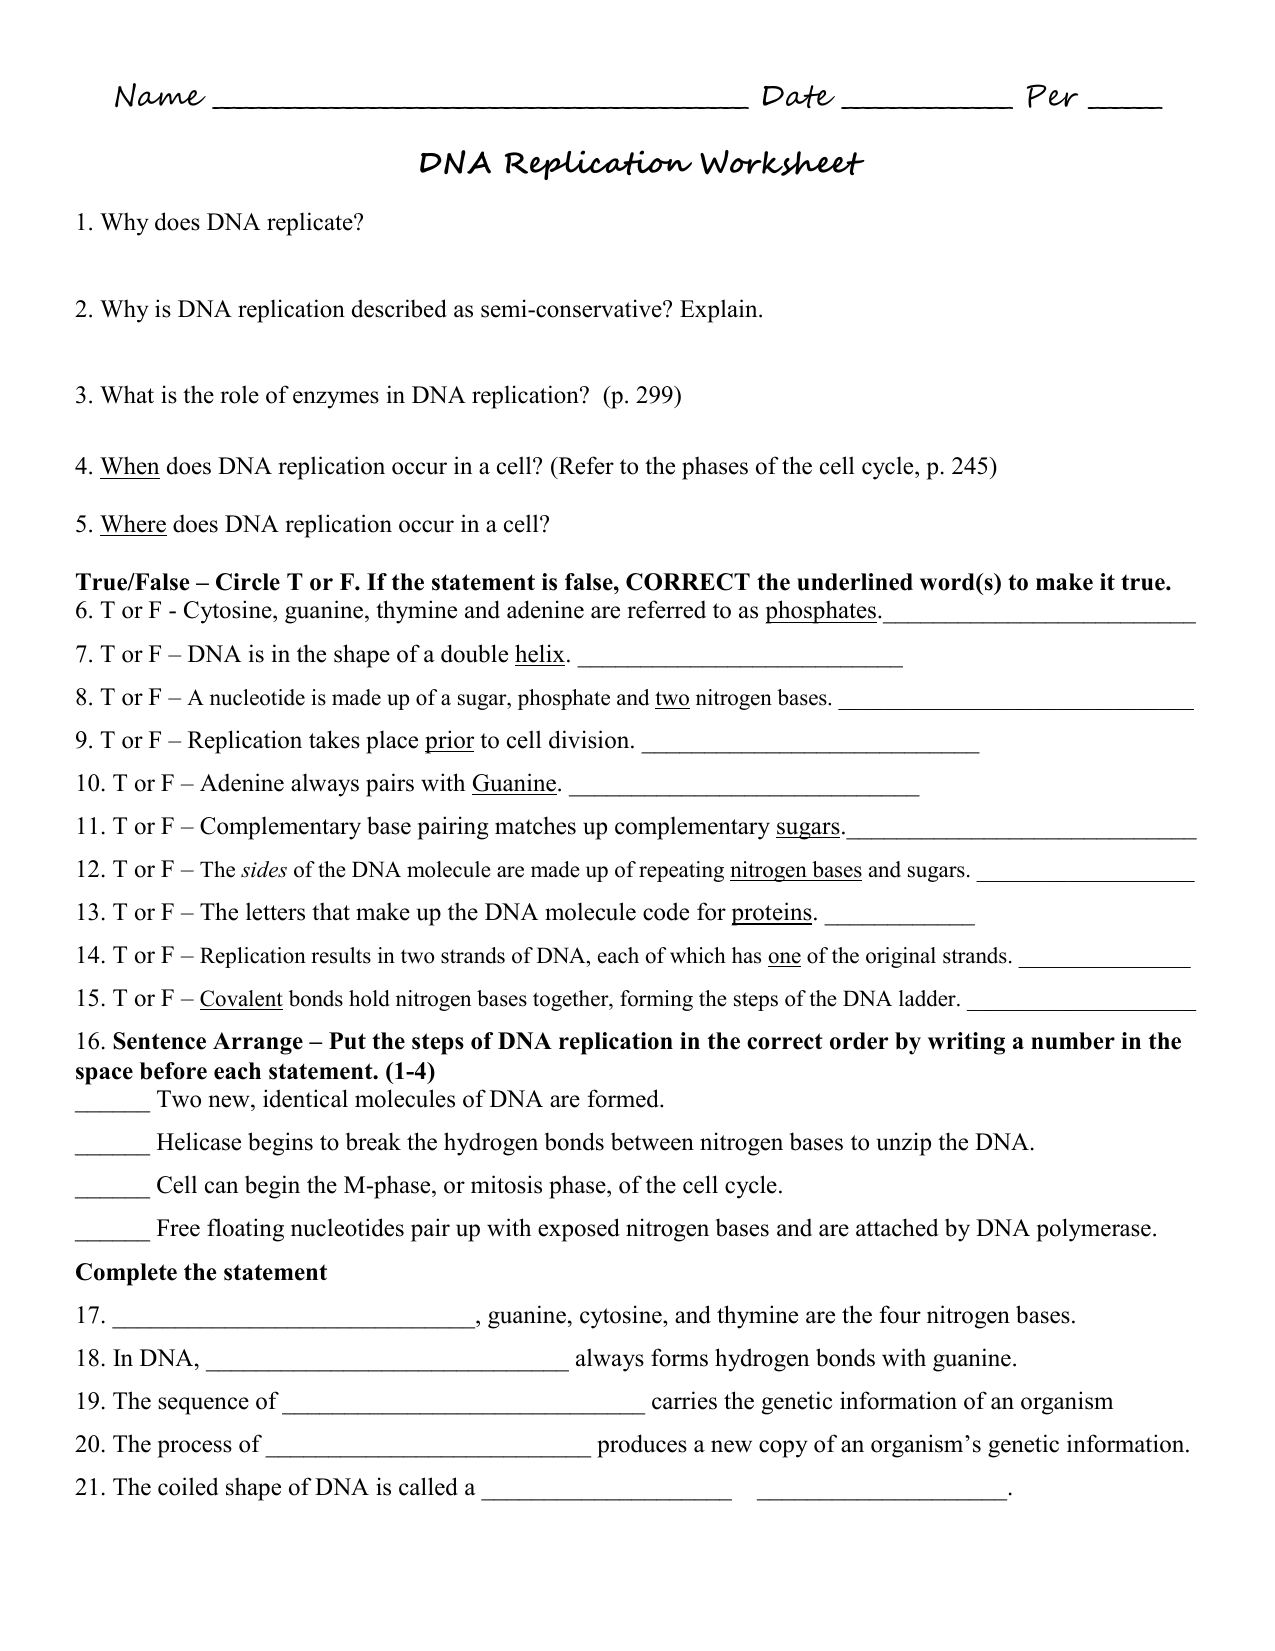 DNA Replication Worksheet With Dna Replication Worksheet Answers